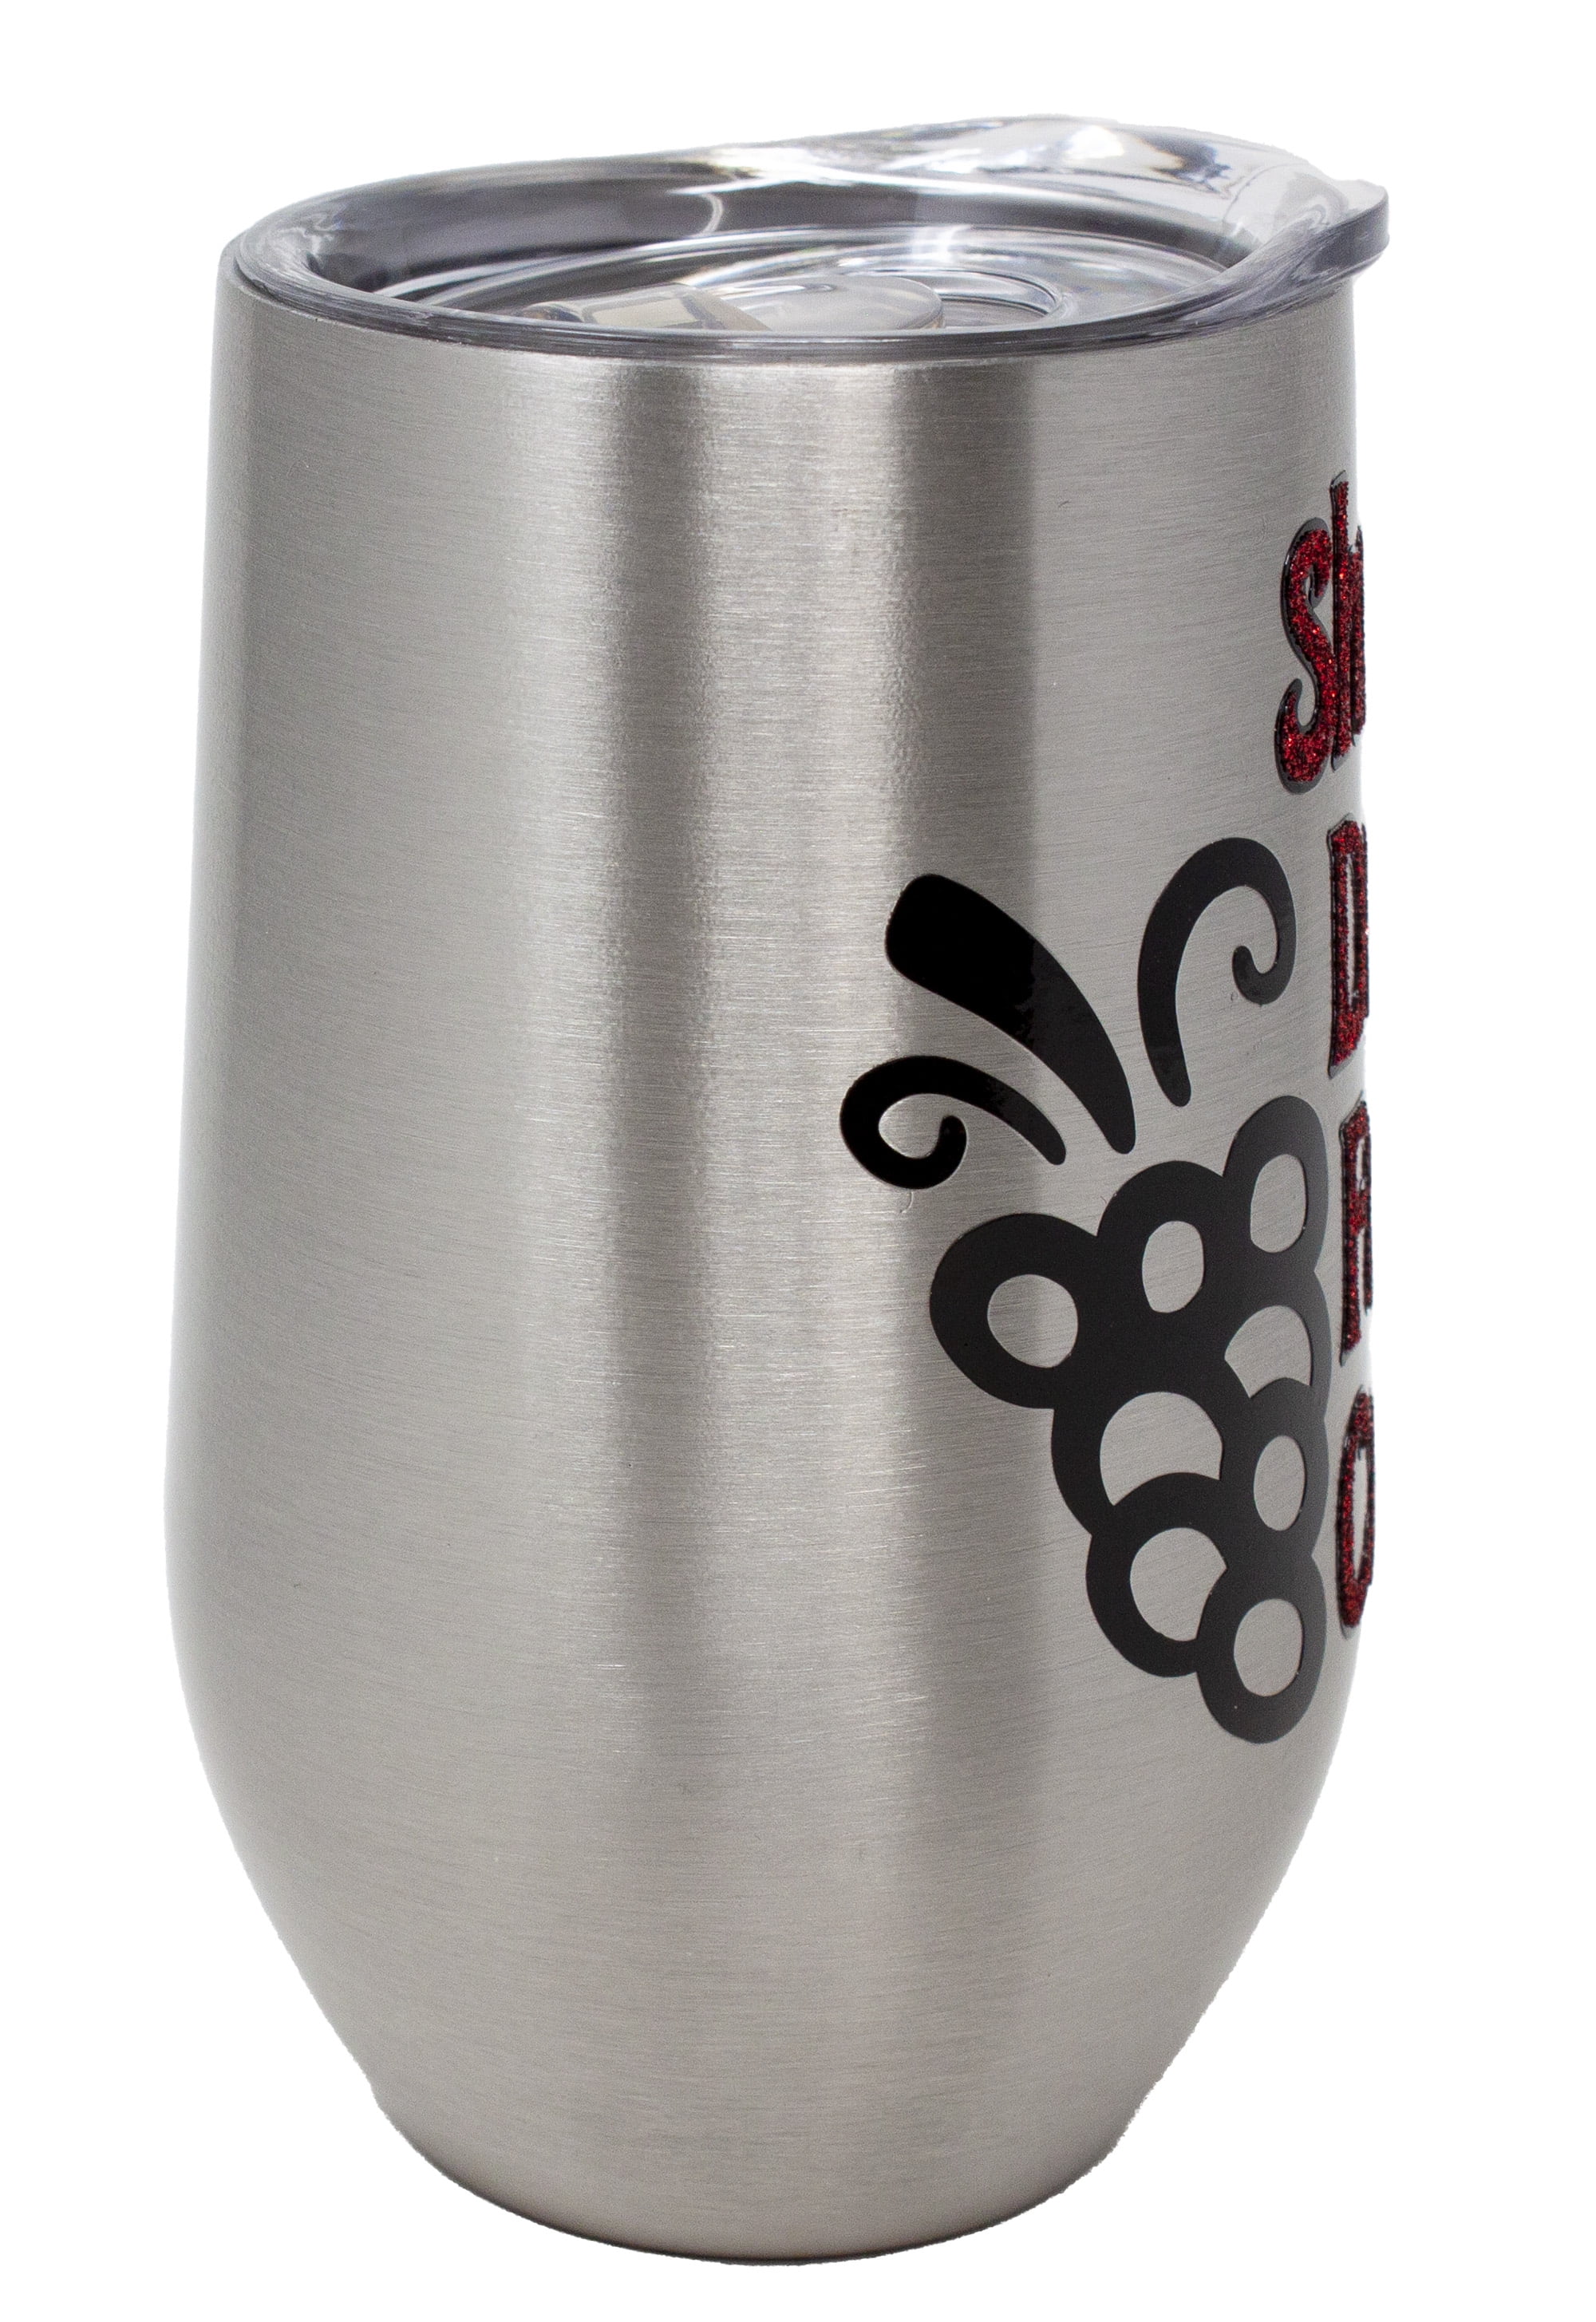 I Love Wine – Engraved Stainless Steel Wine Tumbler, Vacuum Insulated Mug,  Party Favor Gift – 3C Etching LTD